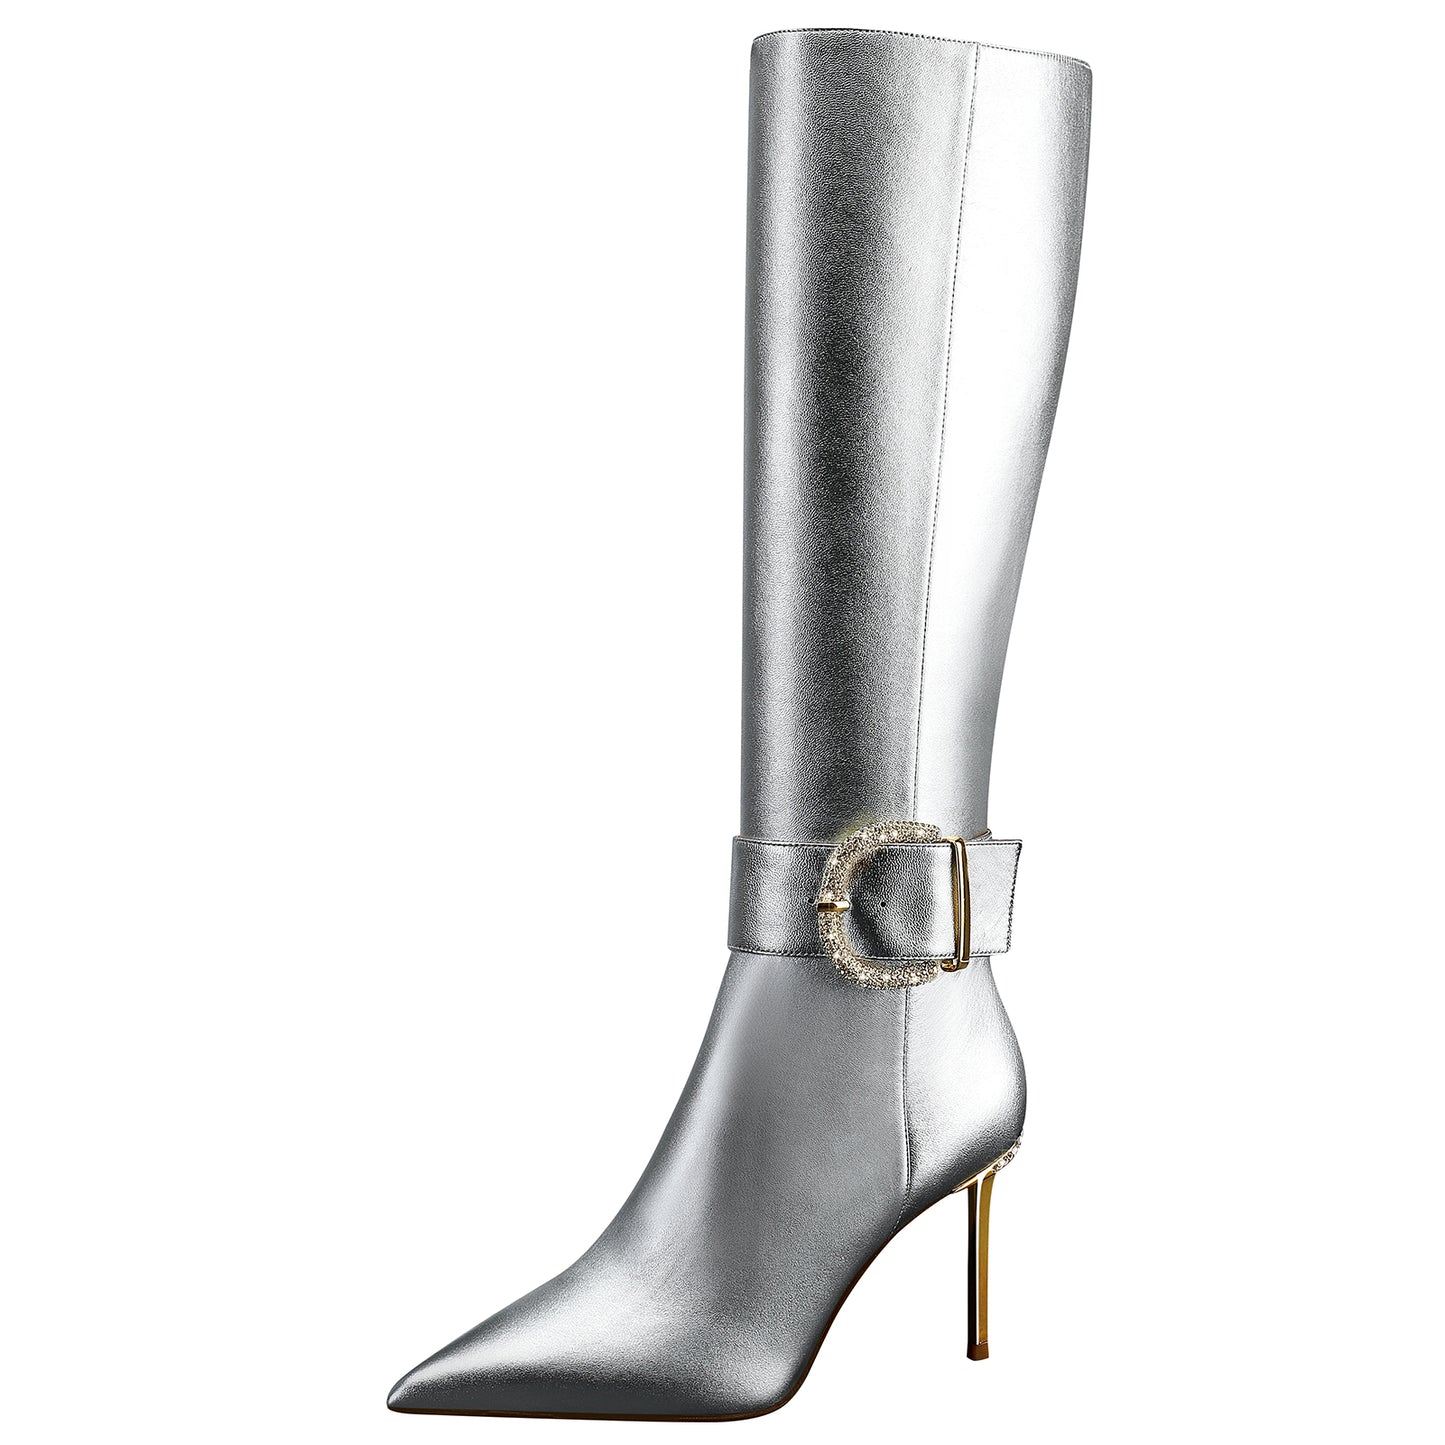 High Heels Long Boots,Zip Leather Knee Boots Pointed Toe Stiletto